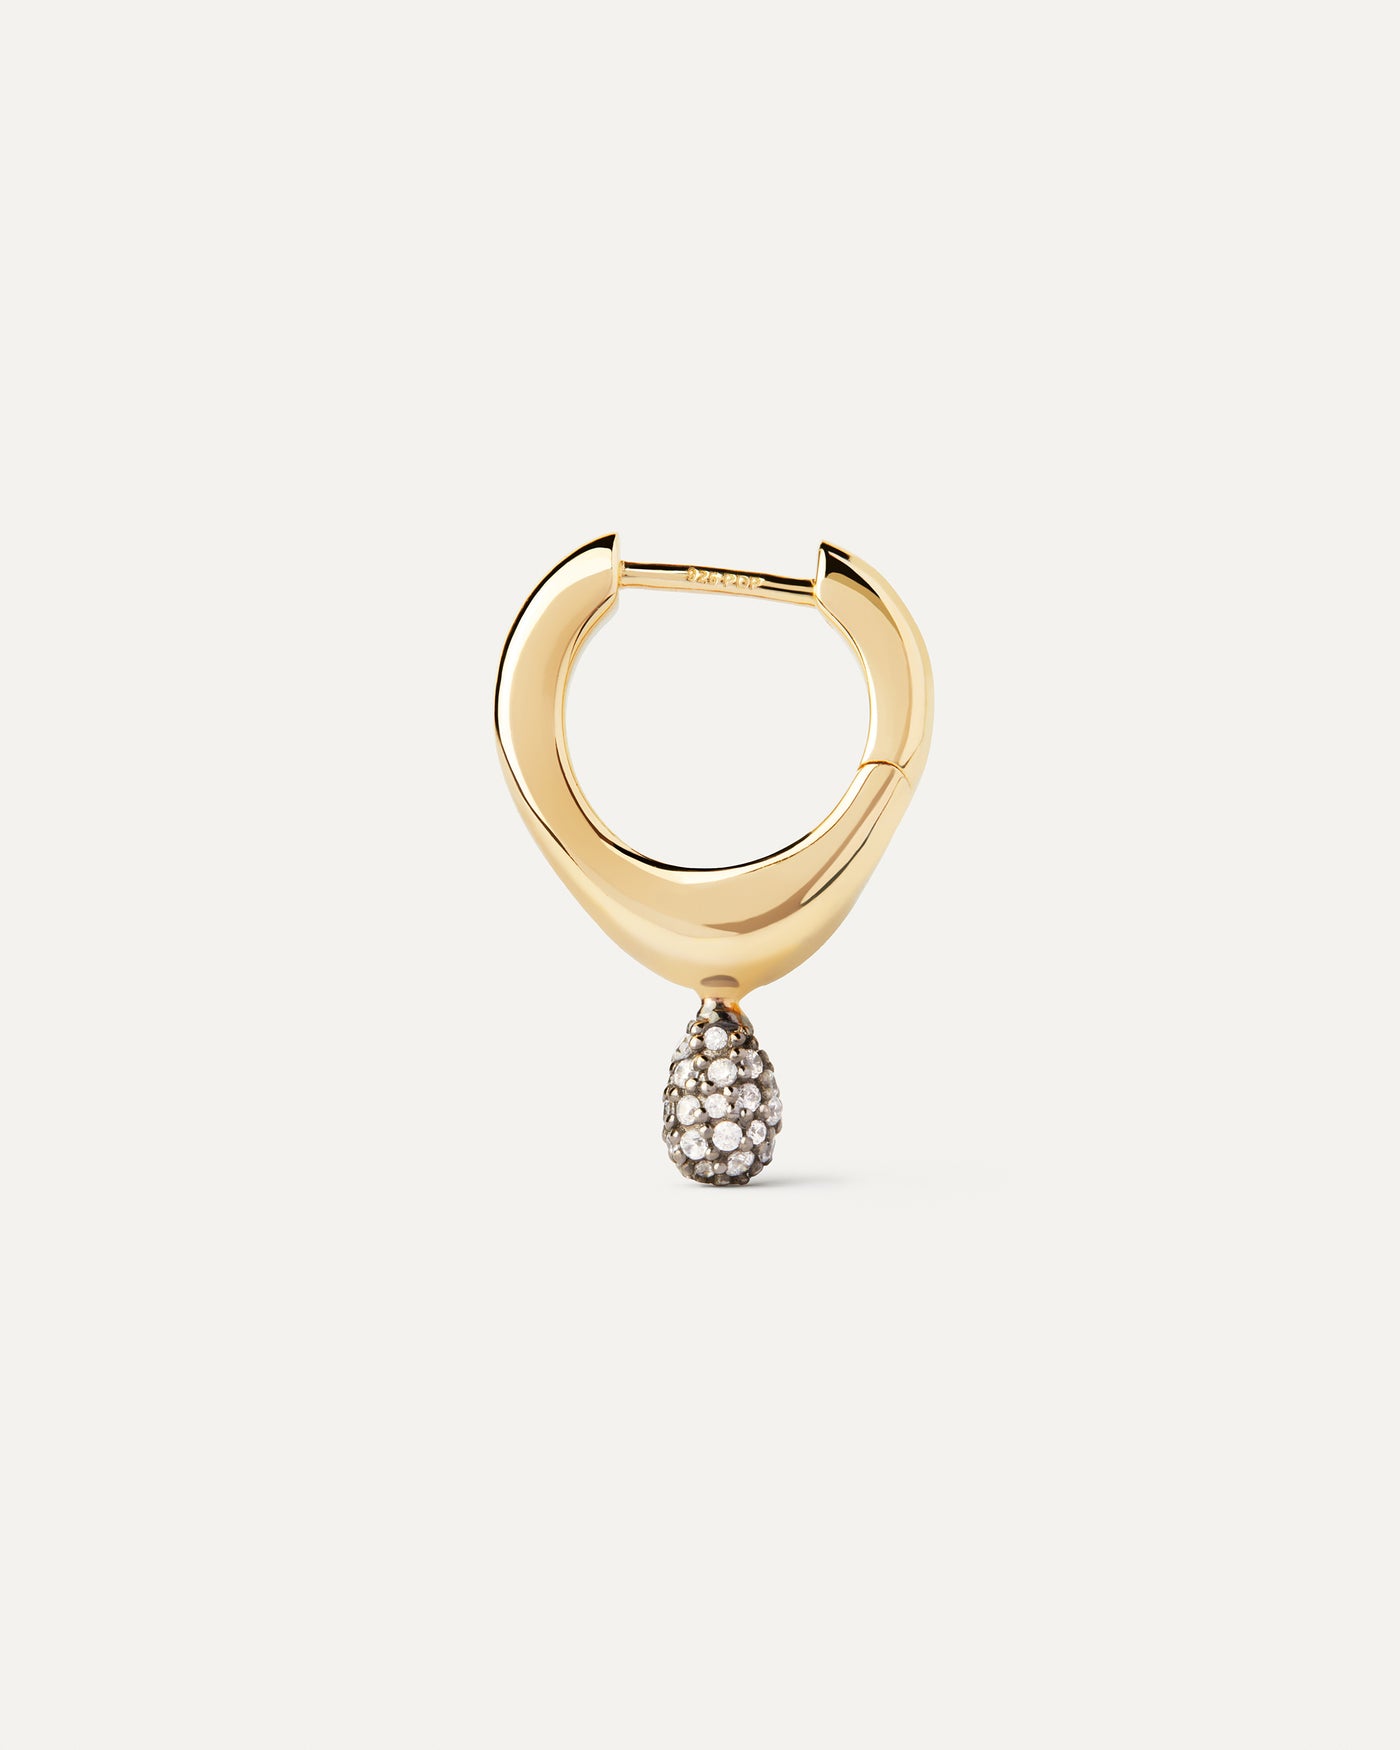 2023 Selection | Pavé Lava Single Hoop. Gold-plated fluid shape single hoop with pavé zirconia drop pendant. Get the latest arrival from PDPAOLA. Place your order safely and get this Best Seller. Free Shipping.